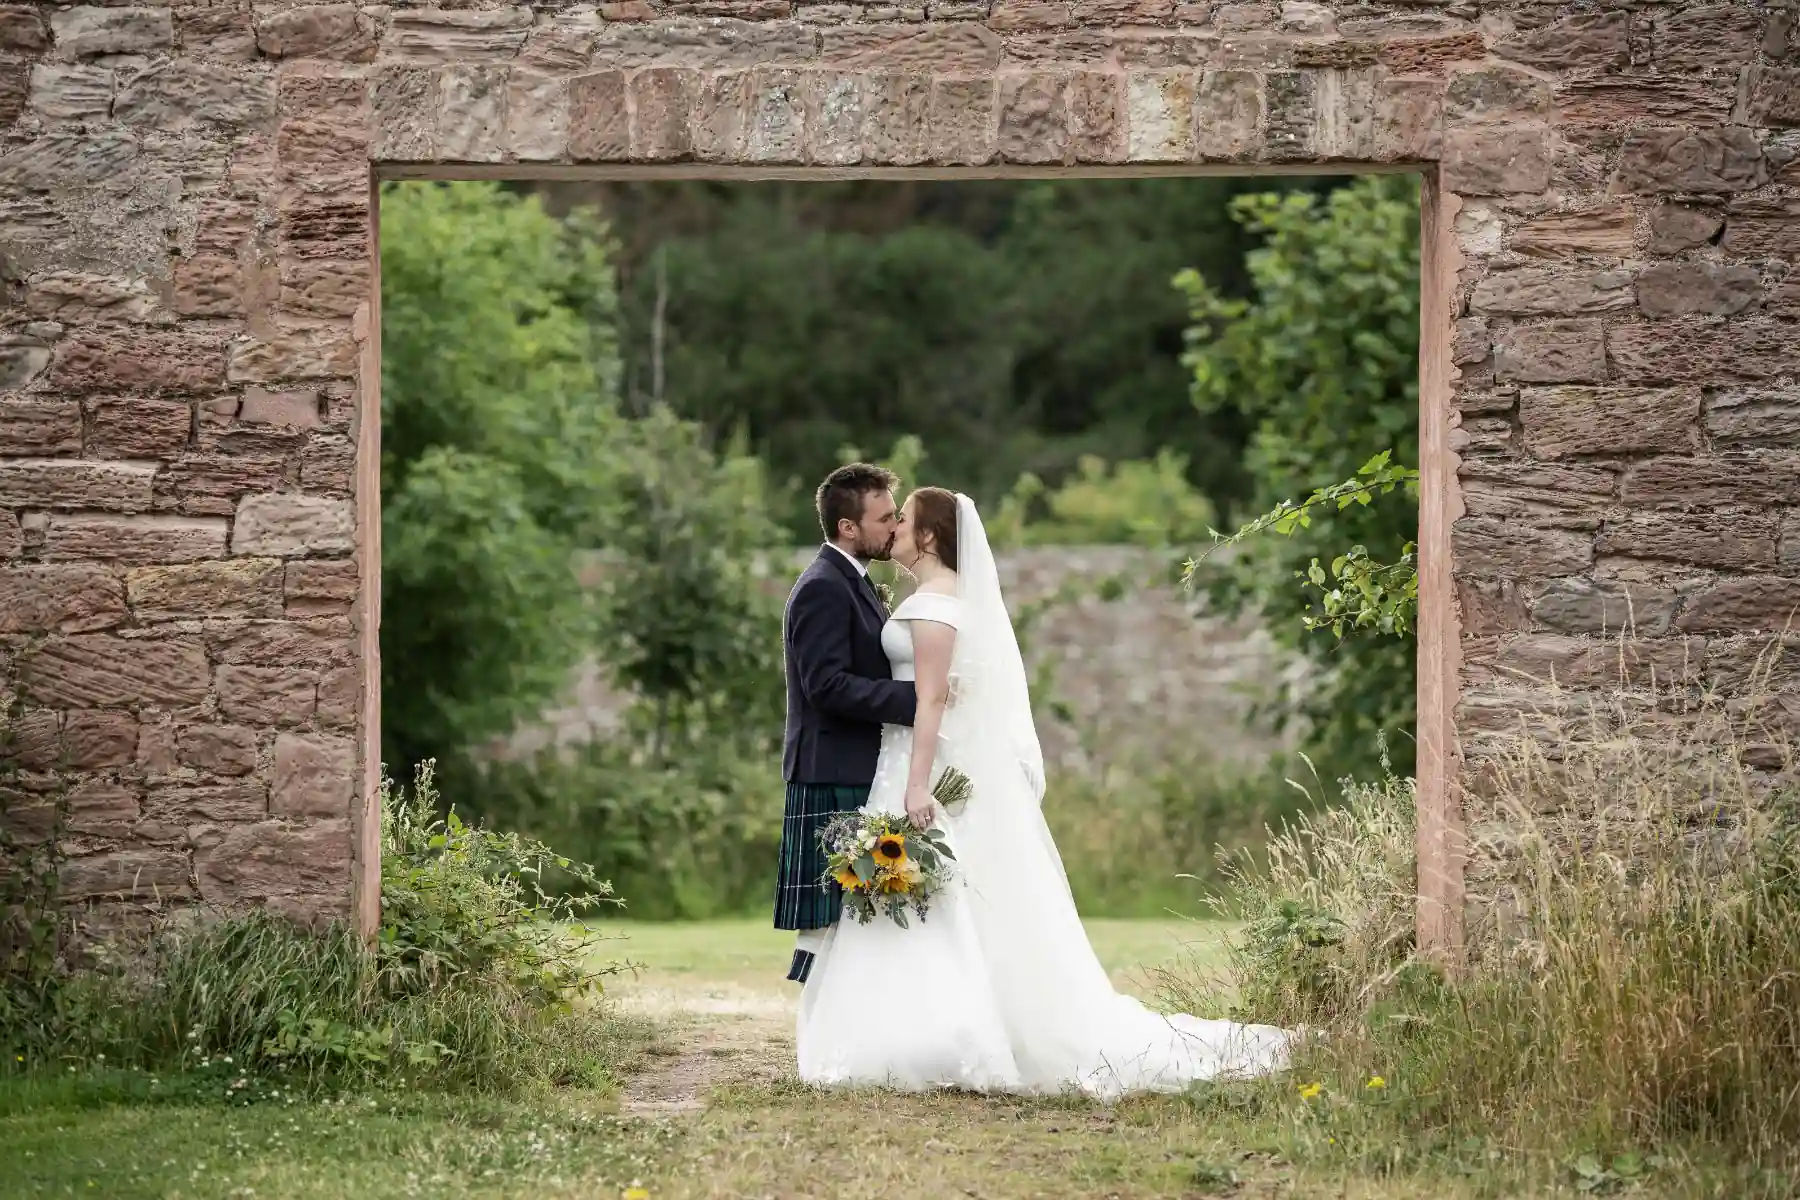 Walled Garden newlyweds at the arch entrance